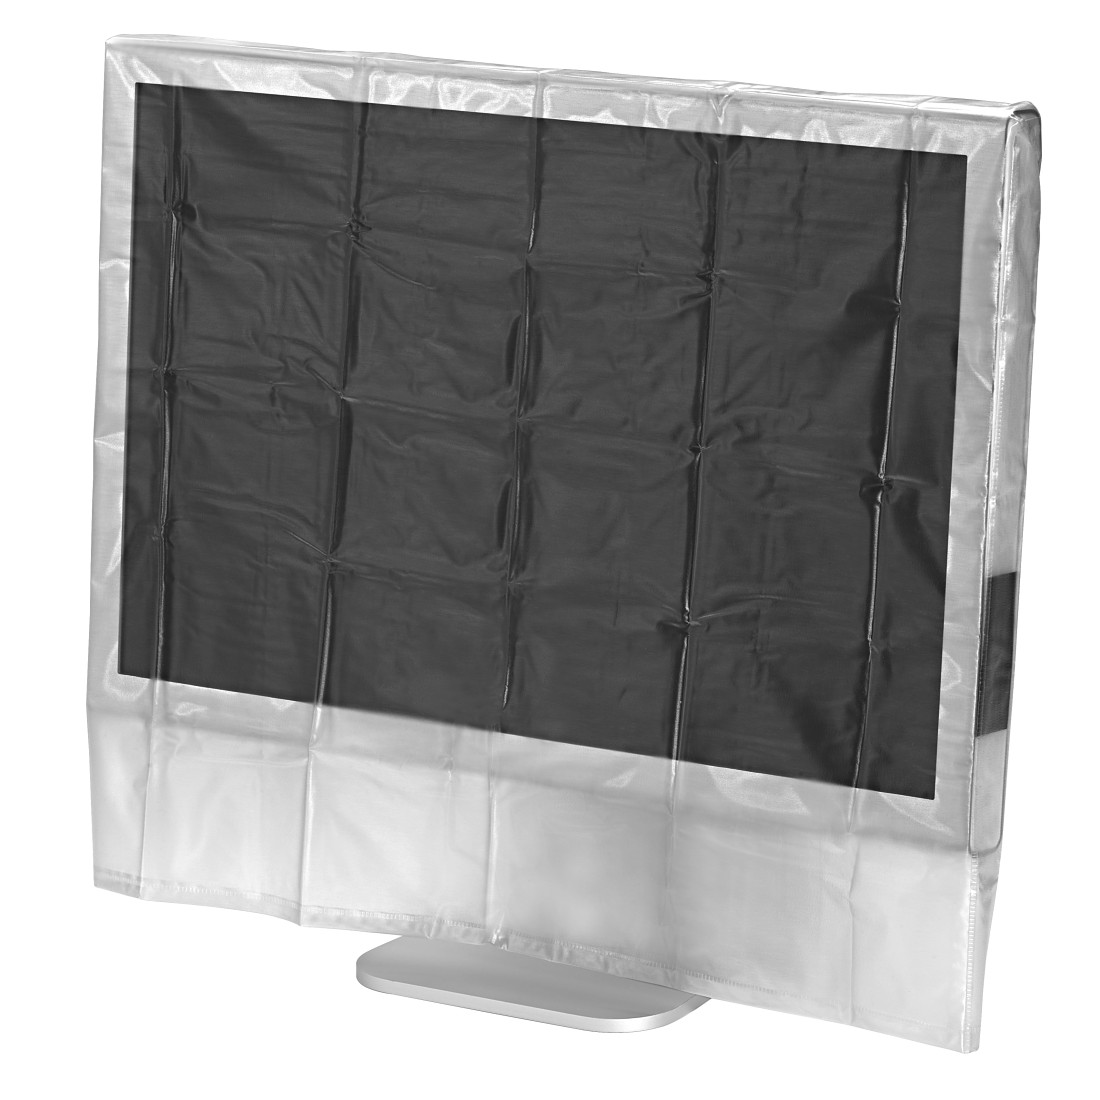 Hama Protective Dust Cover for 24 and 26 inch Screens